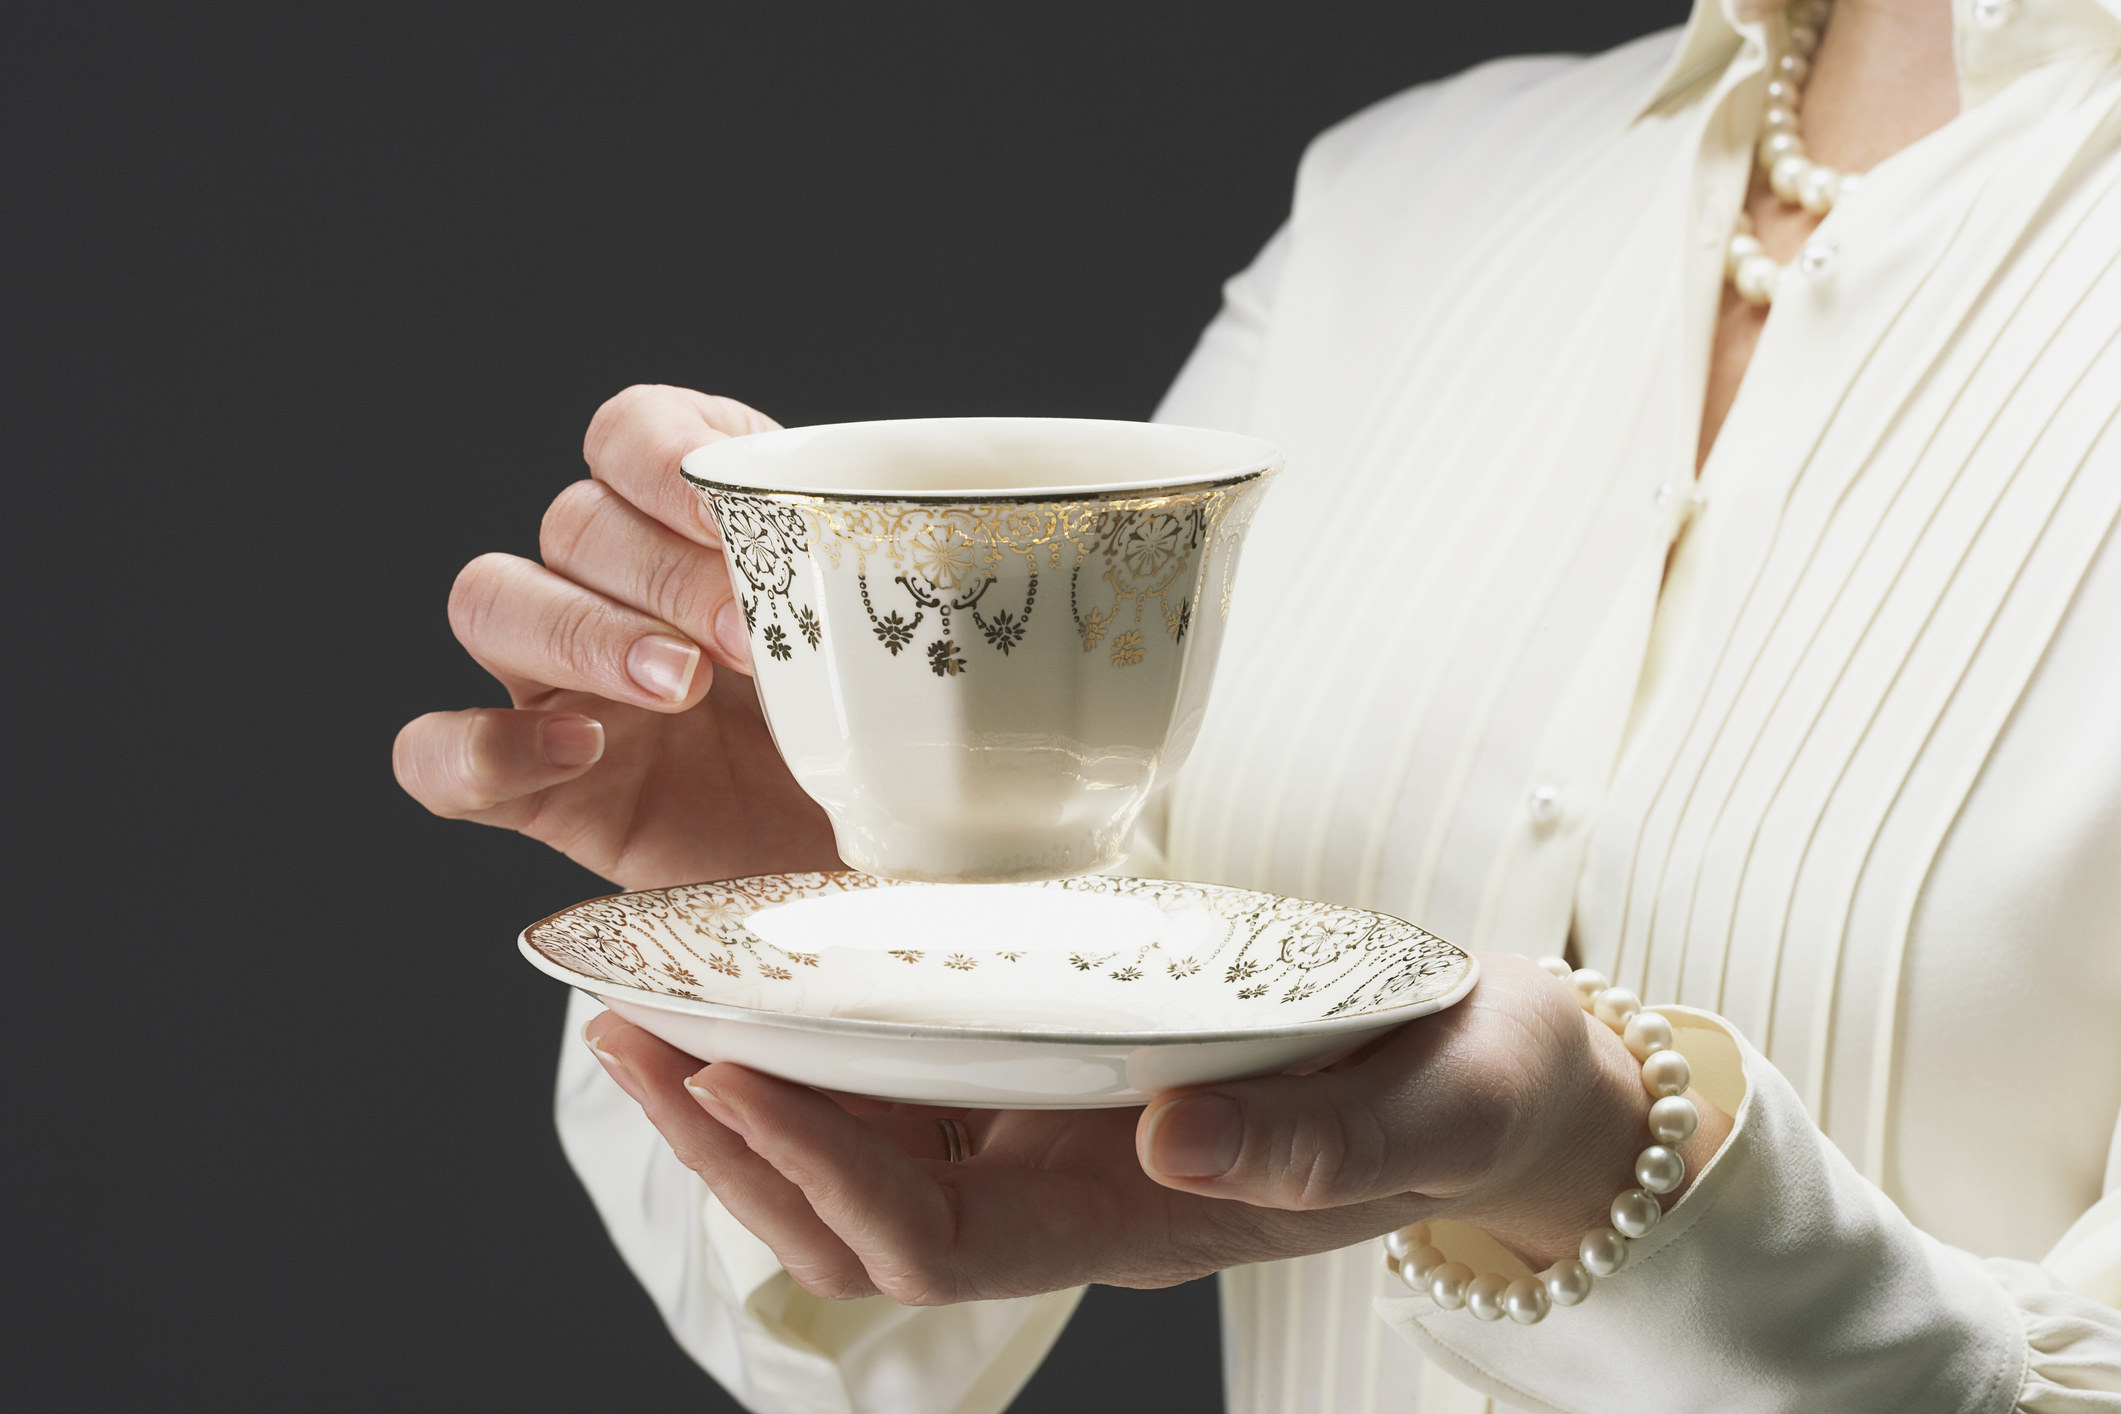 Person wearing a cardigan and a pearl bracelet holds a teacup and saucer